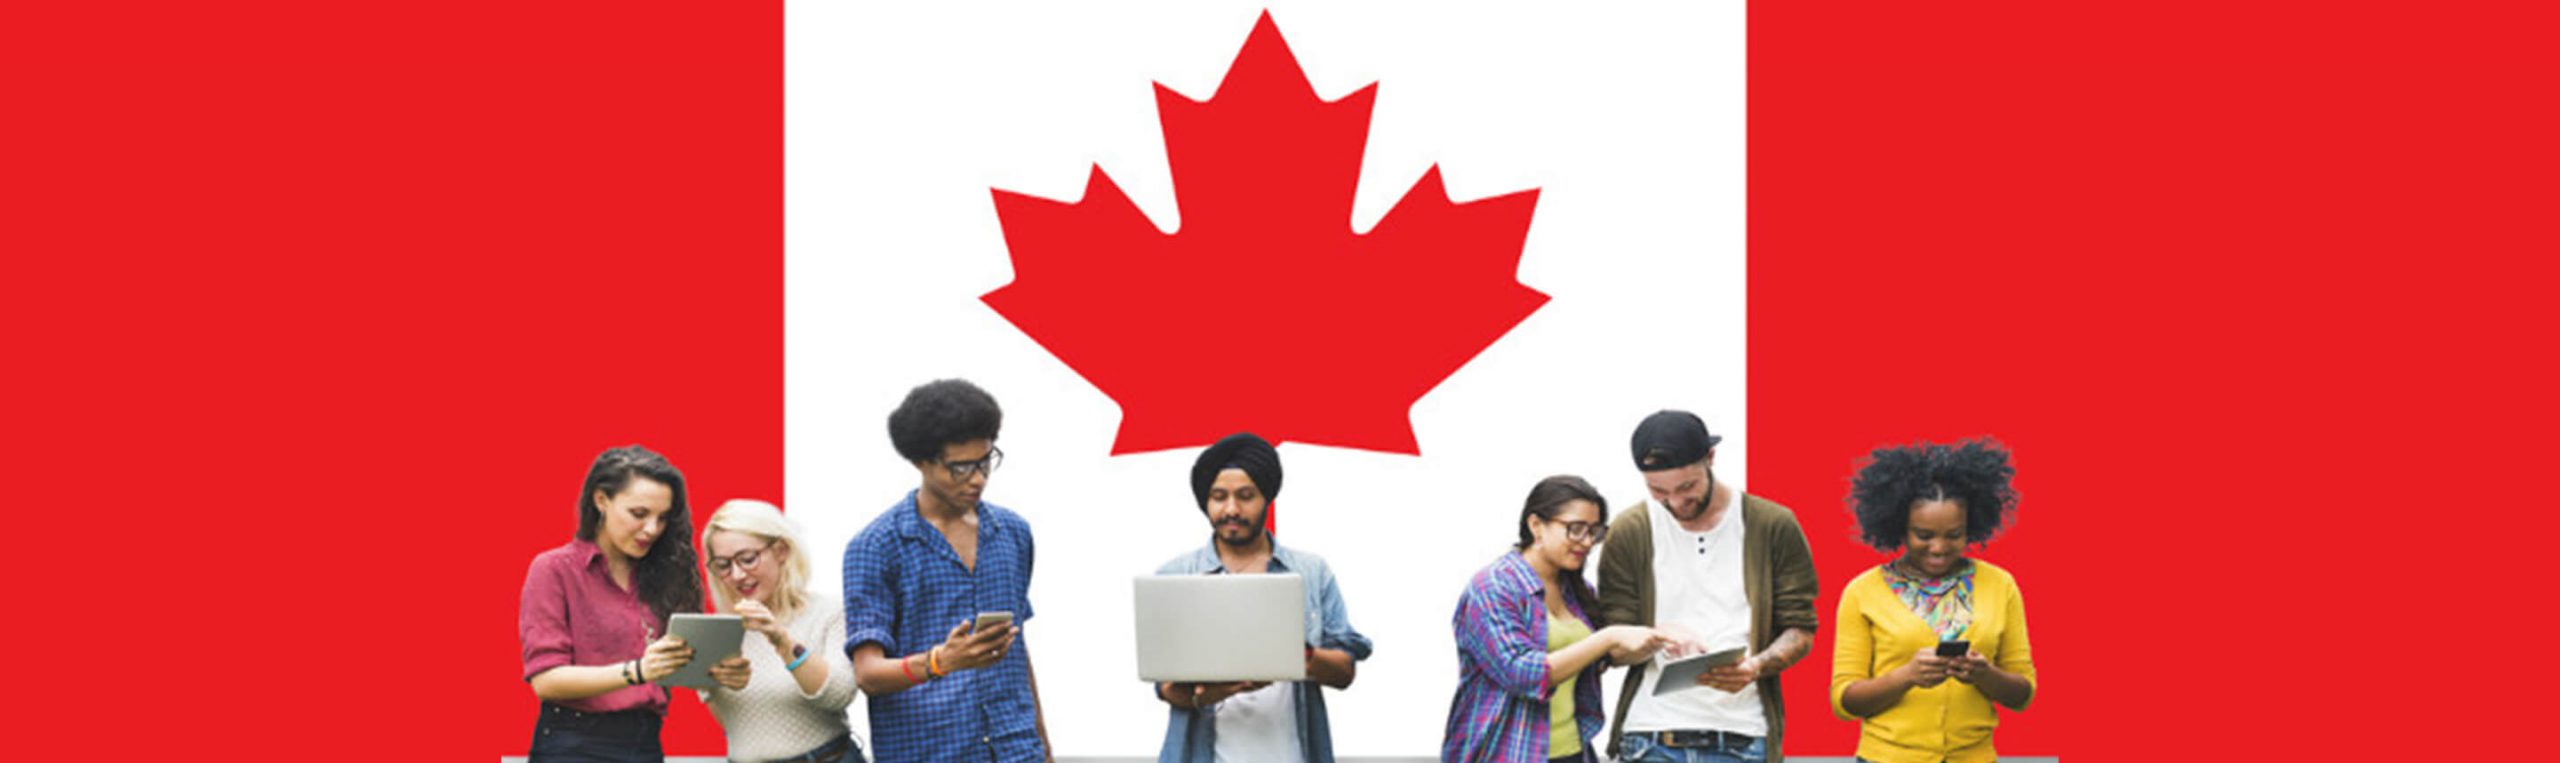 8 Things To Consider Before Studying In Canada scaled انواع ویزای کانادا